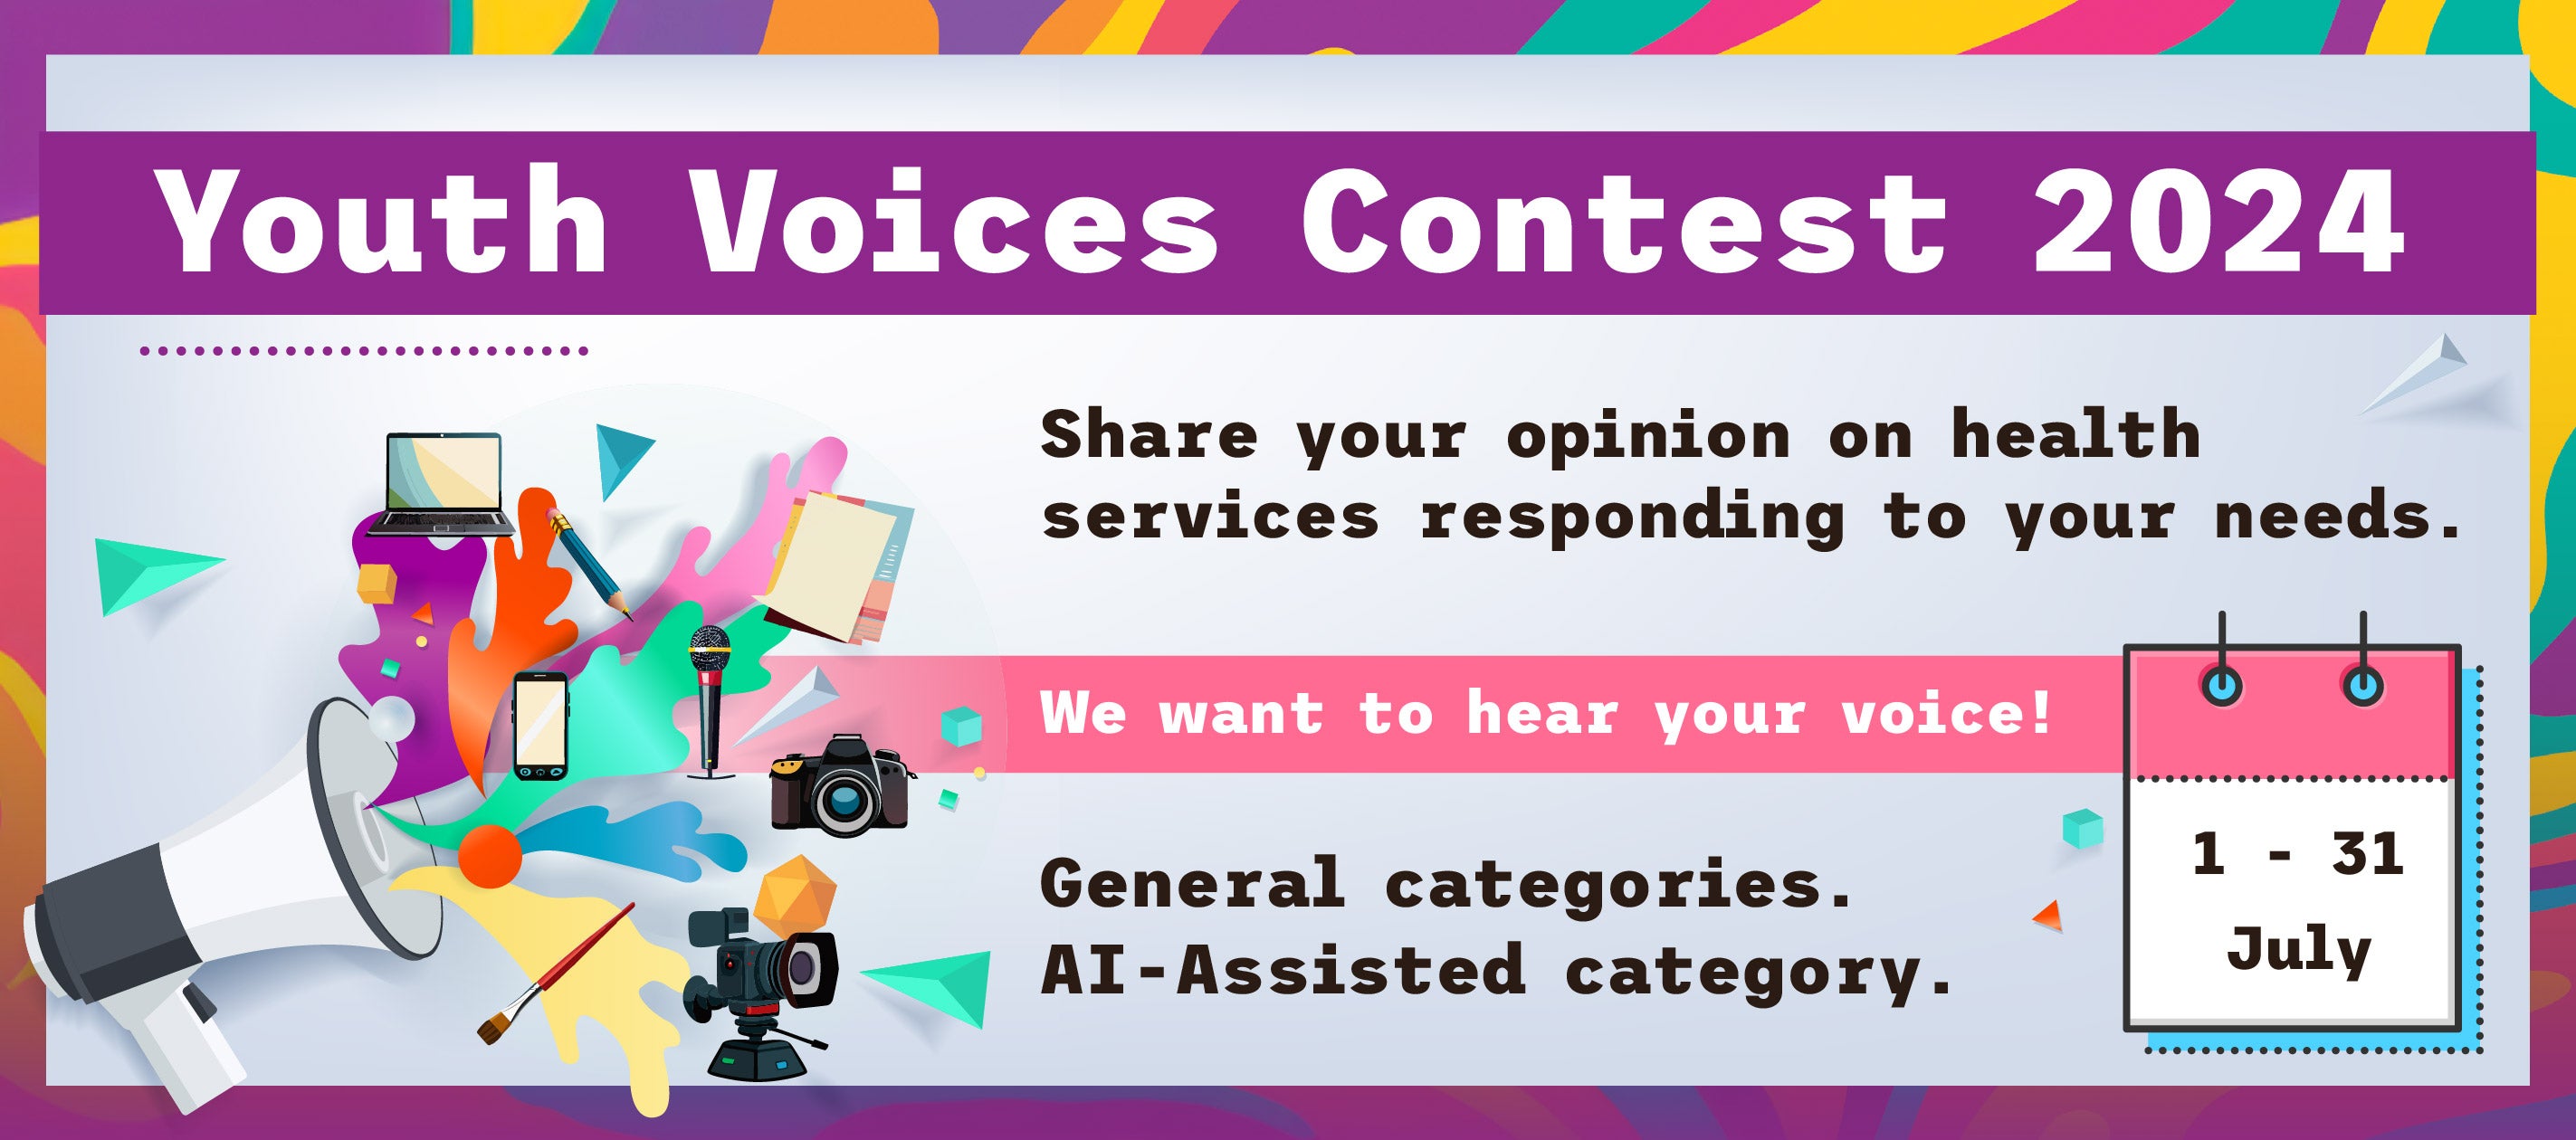 Youth Voices Contest 2024